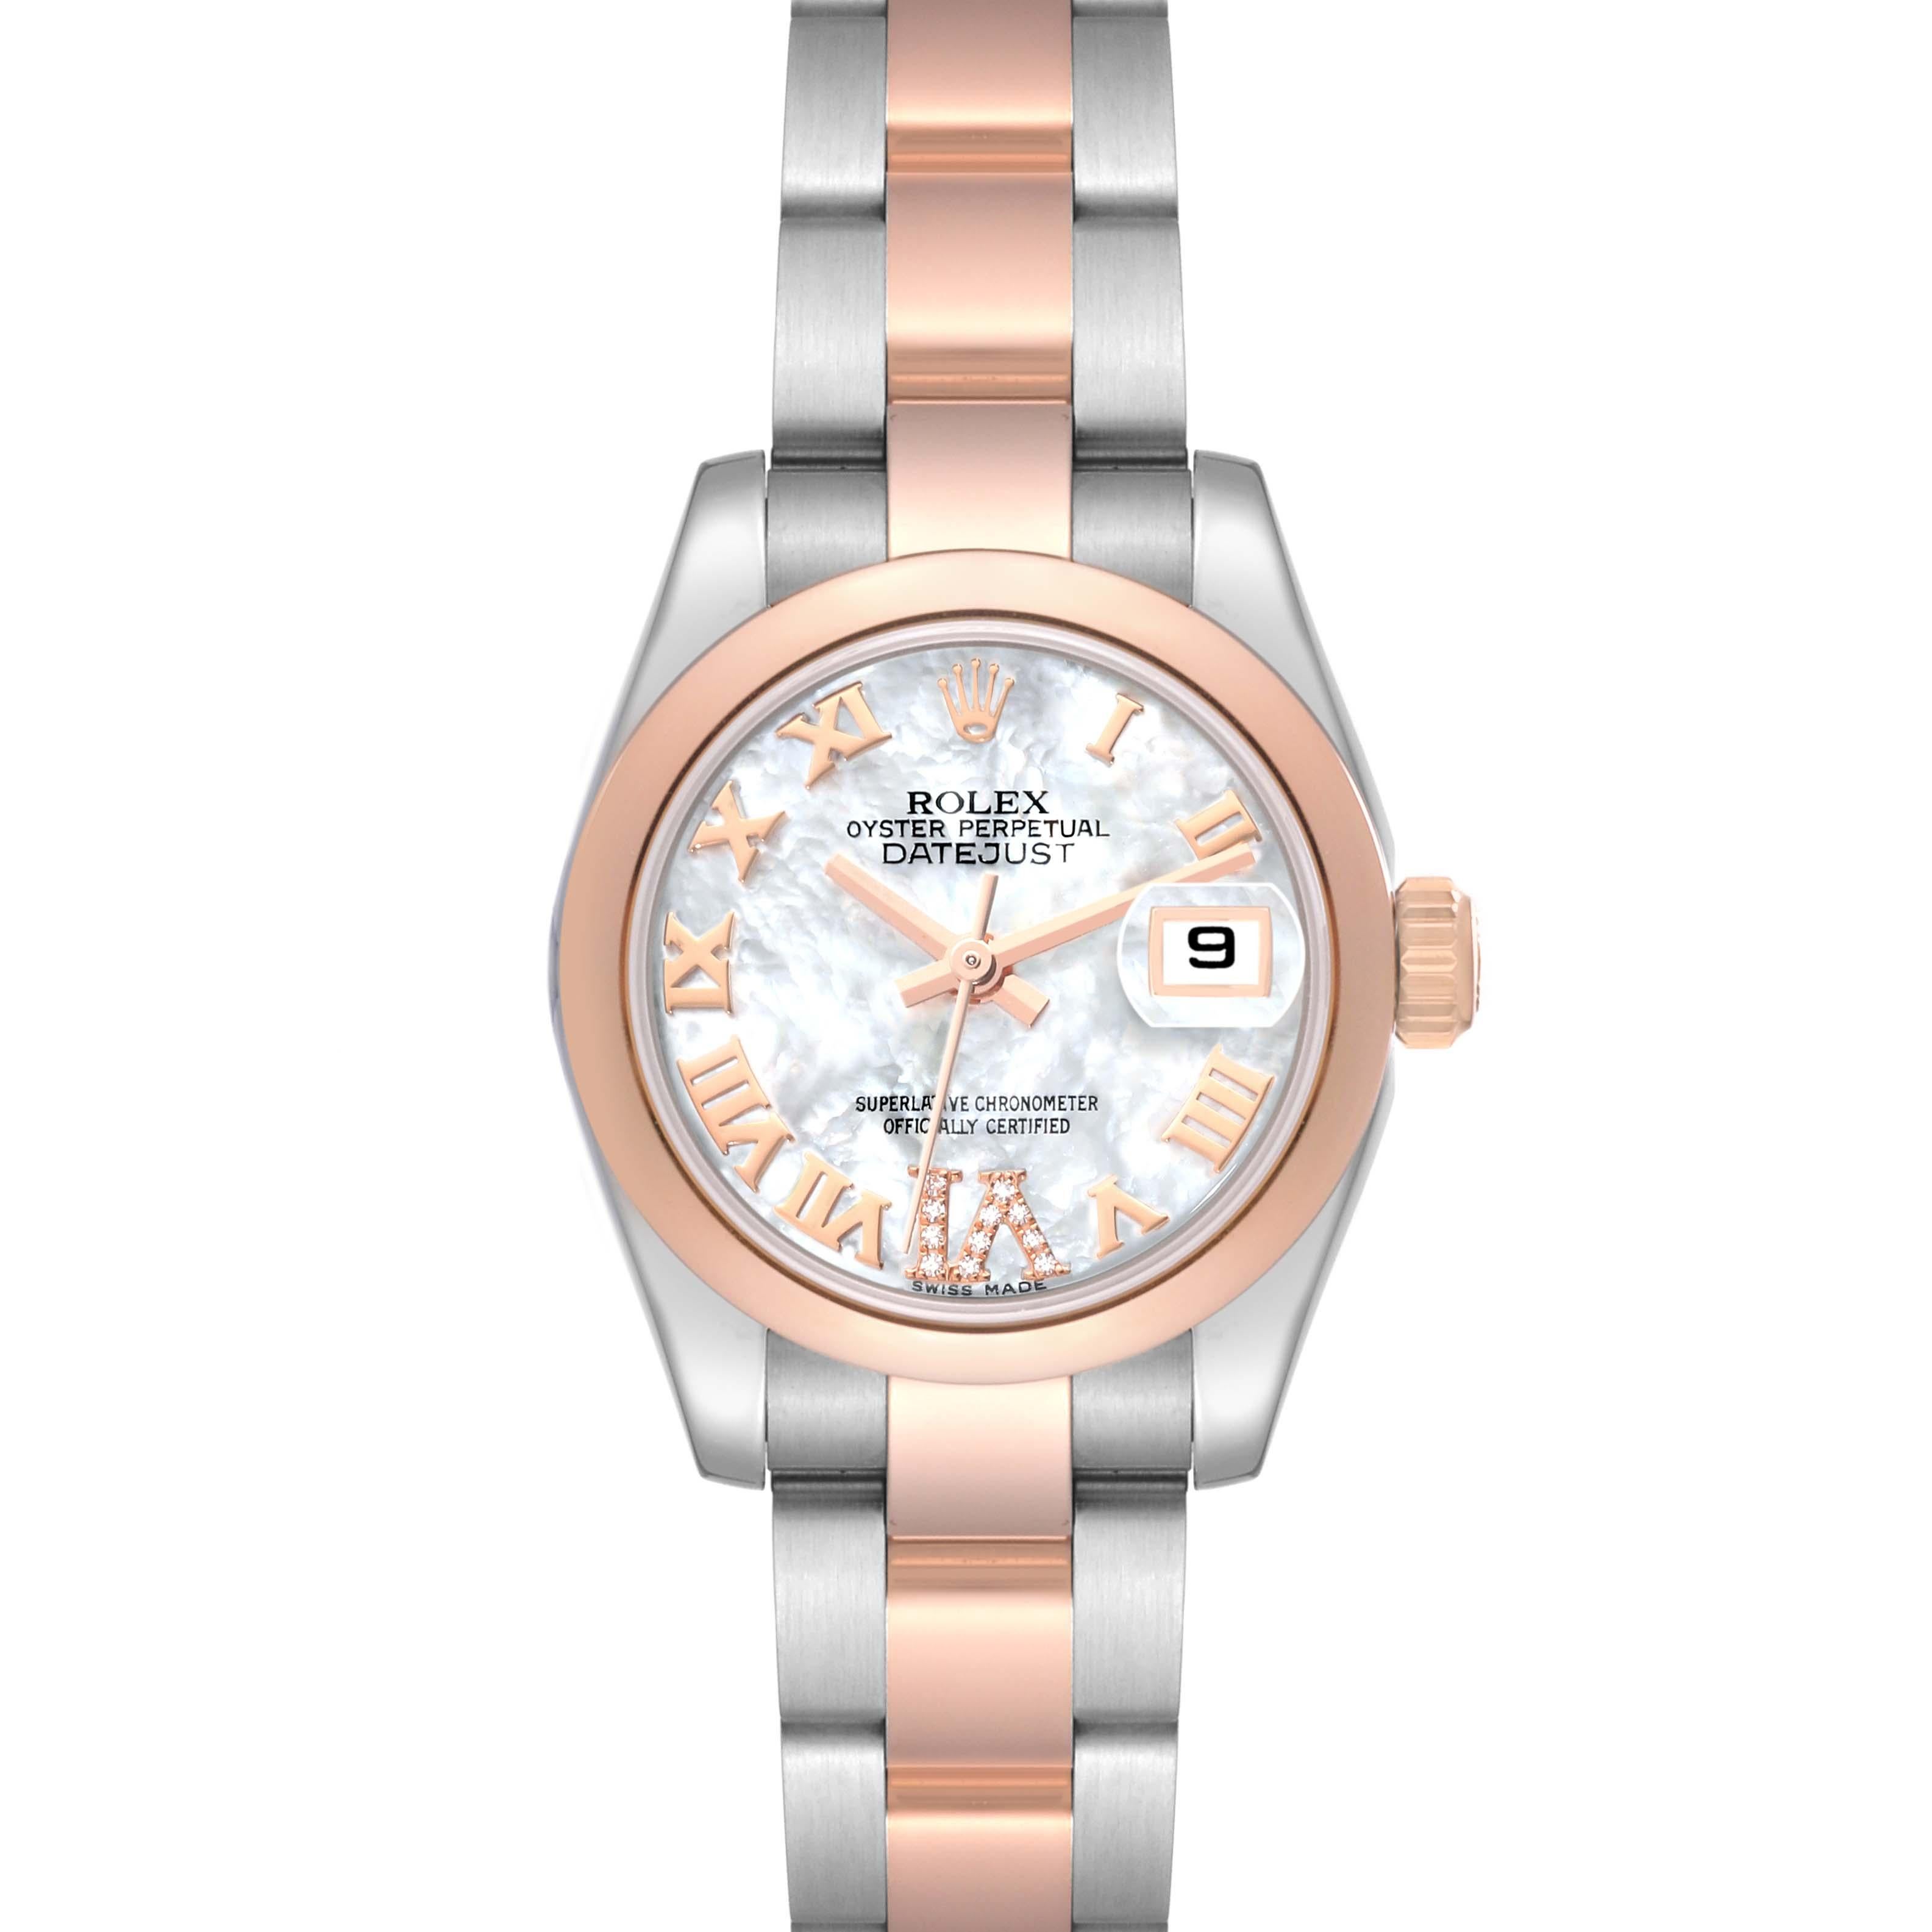 Rolex Datejust Steel Rose Gold Mother of Pearl Diamond Dial Ladies Watch 179161 Box Card. Officially certified chronometer automatic self-winding movement. Stainless steel oyster case 26.0 mm in diameter. Rolex logo on an 18K rose gold crown. 18k